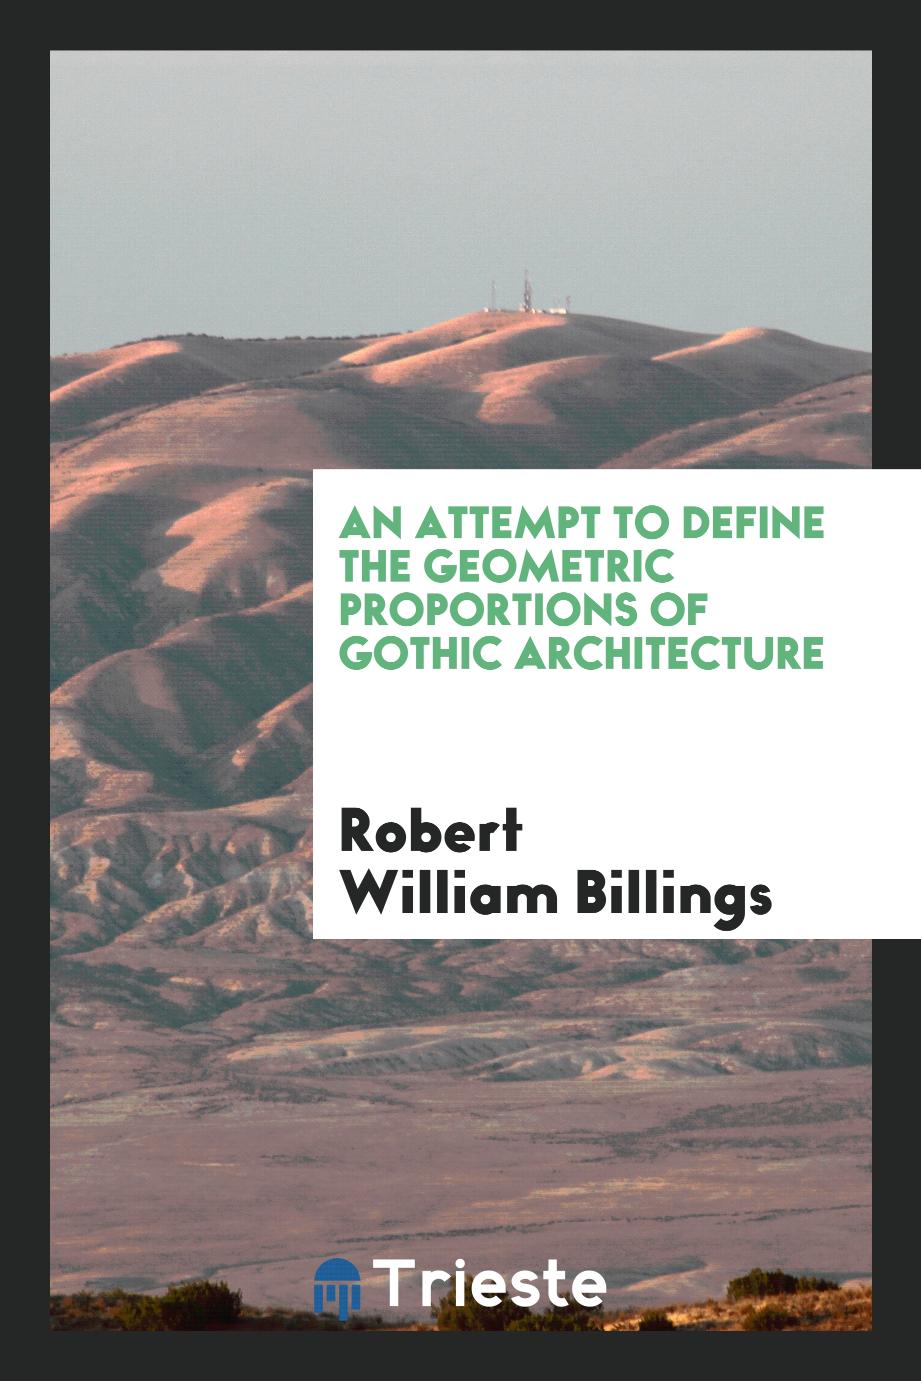 An attempt to define the geometric proportions of Gothic architecture